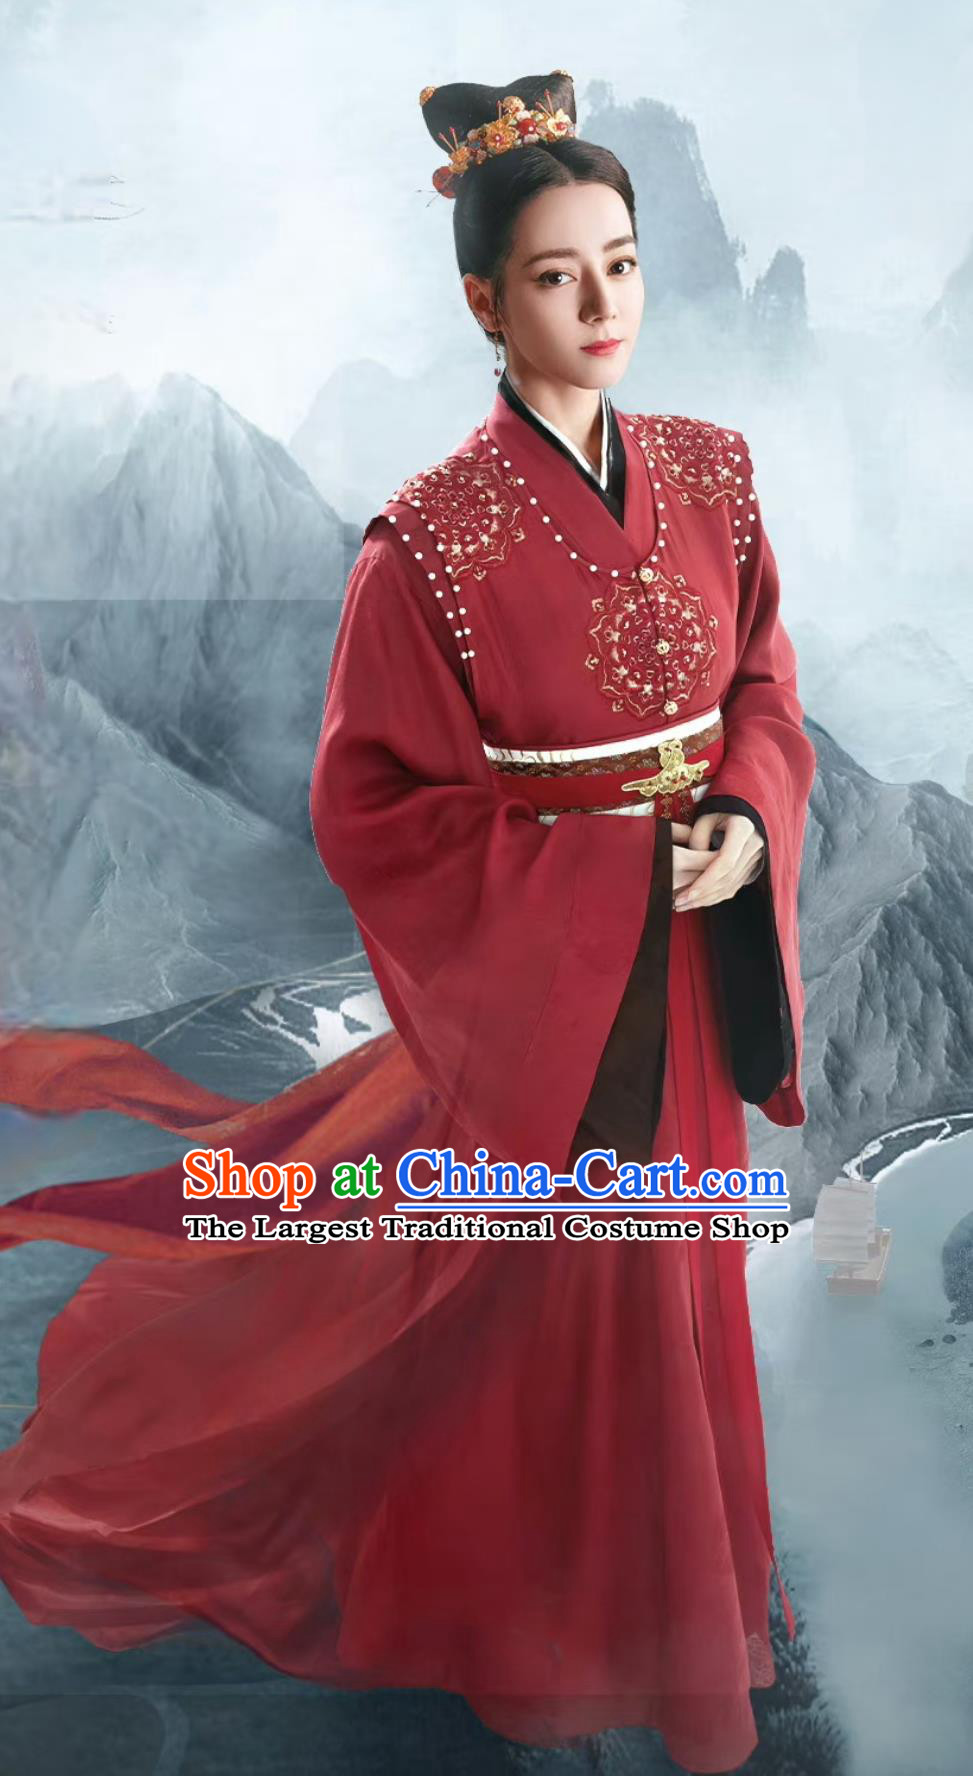 Ancient China Woman Clothing Traditional Hanfu TV Series The Legend of An Le Crown Princess Ren An Le Red Dress